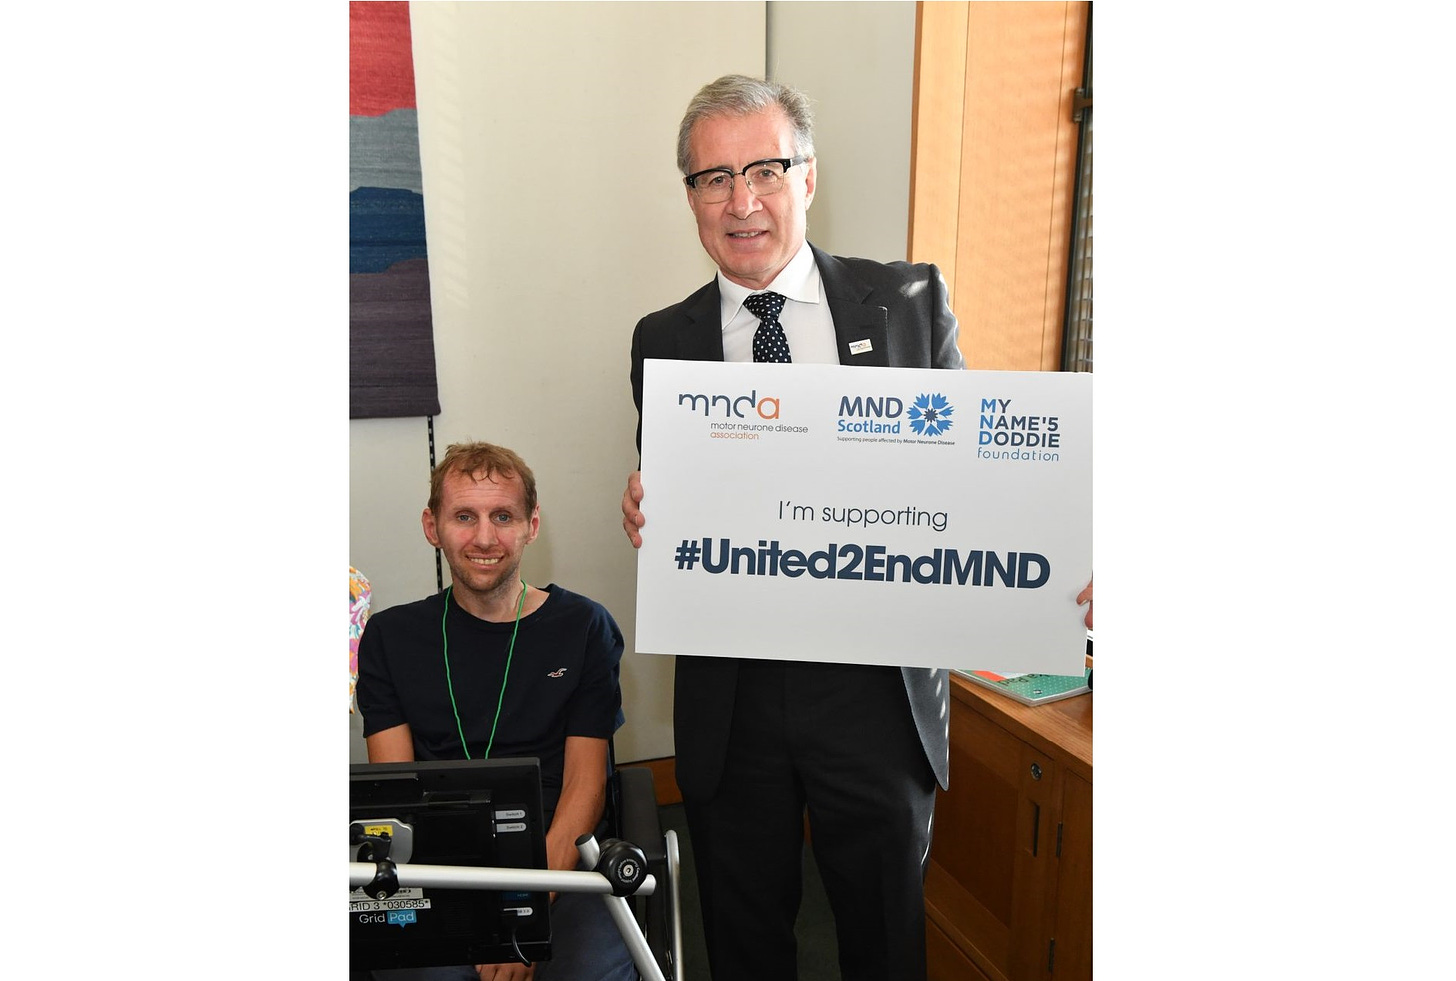 Rugby MP Mark Pawsey supporting the #United2EndMND campaign alongside rugby league legend Rob Burrow MBE, who has MND